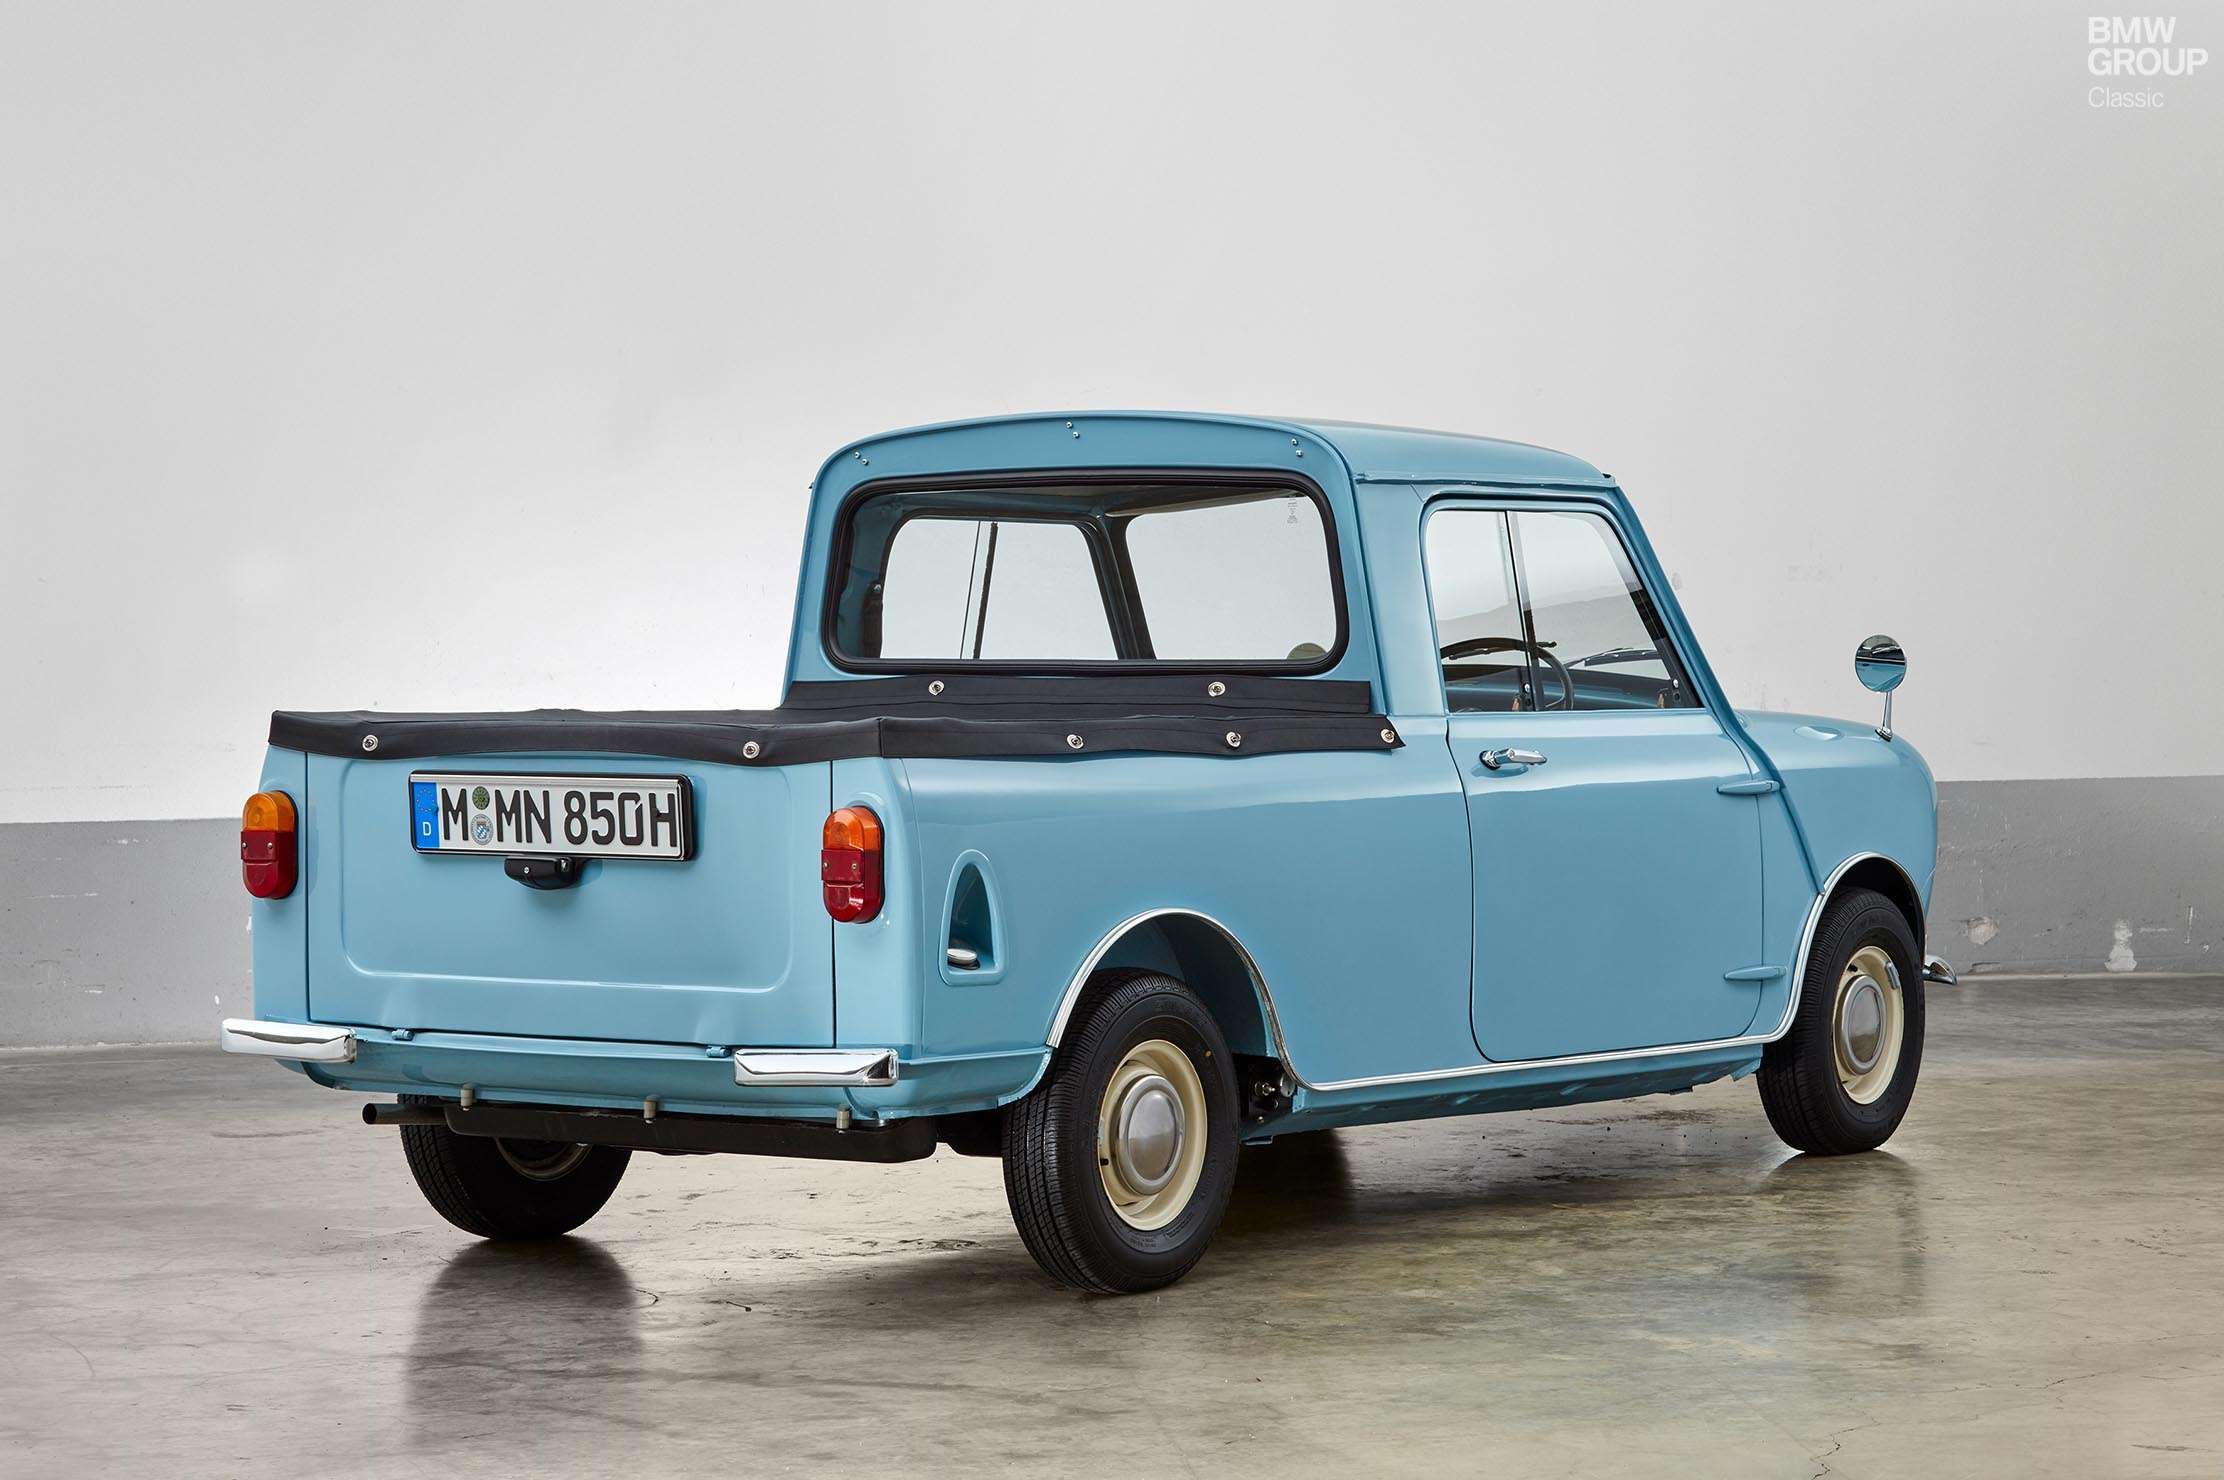 The rear end of the Classic Mini Cooper S Pickup.